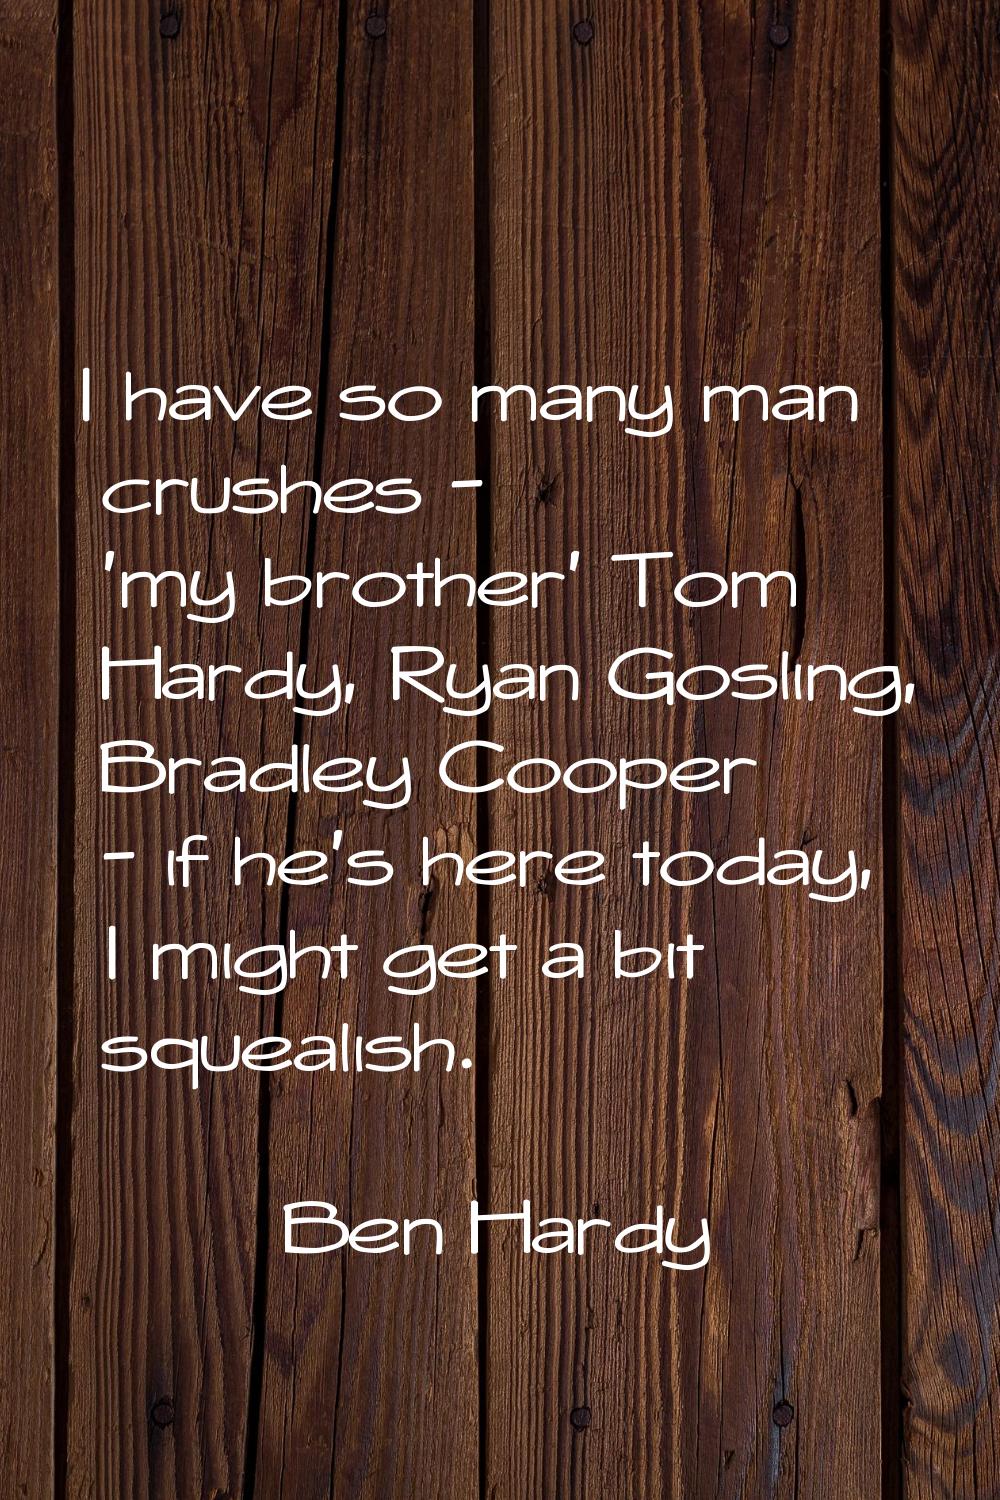 I have so many man crushes - 'my brother' Tom Hardy, Ryan Gosling, Bradley Cooper - if he's here to